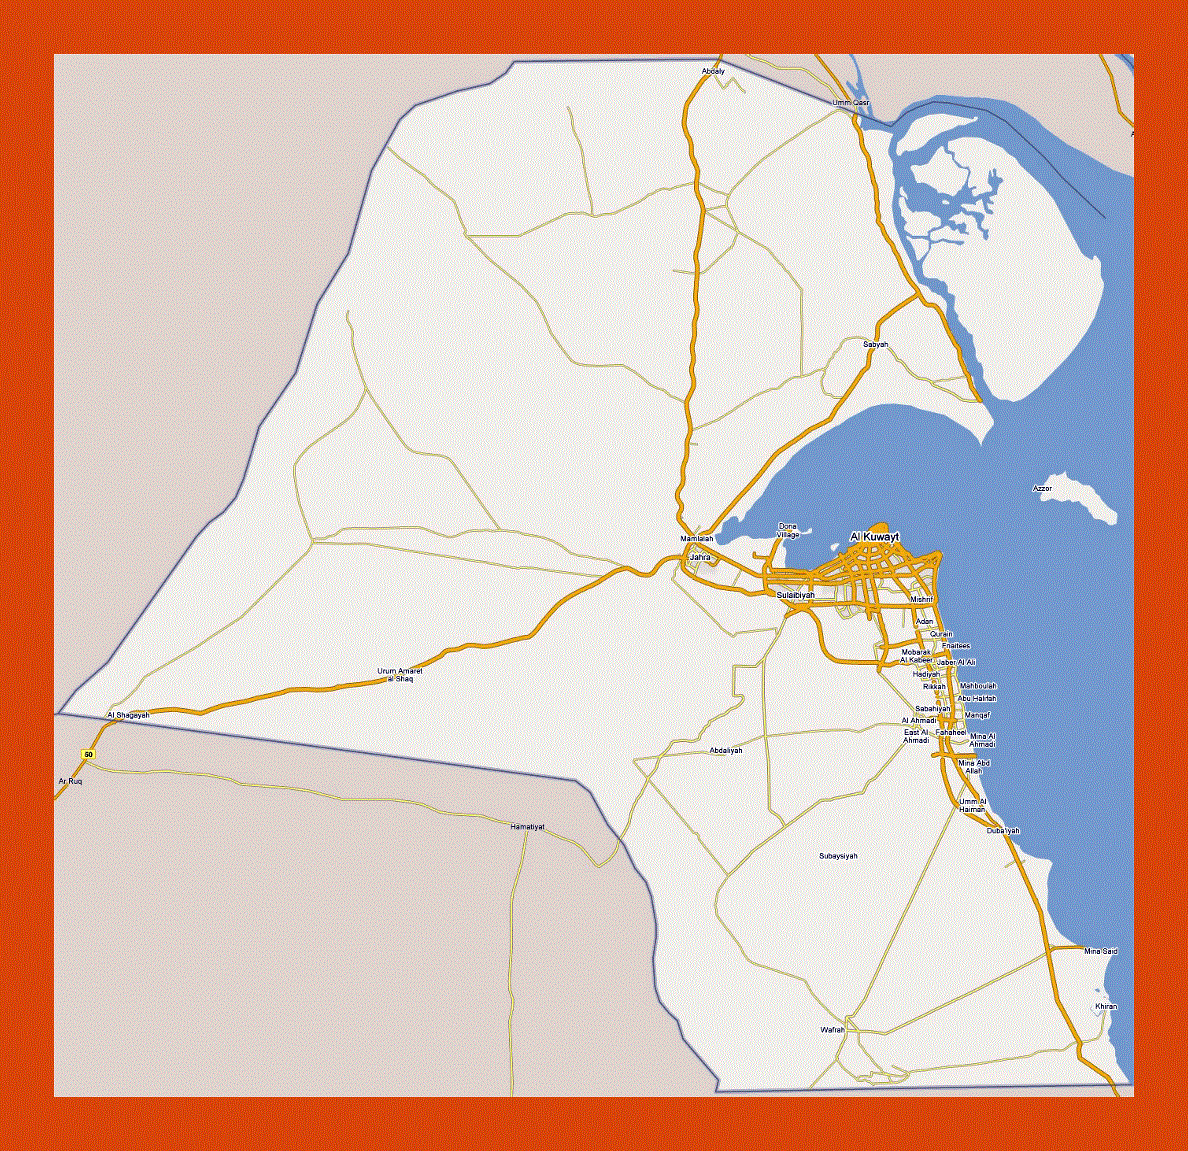 Road map of Kuwait